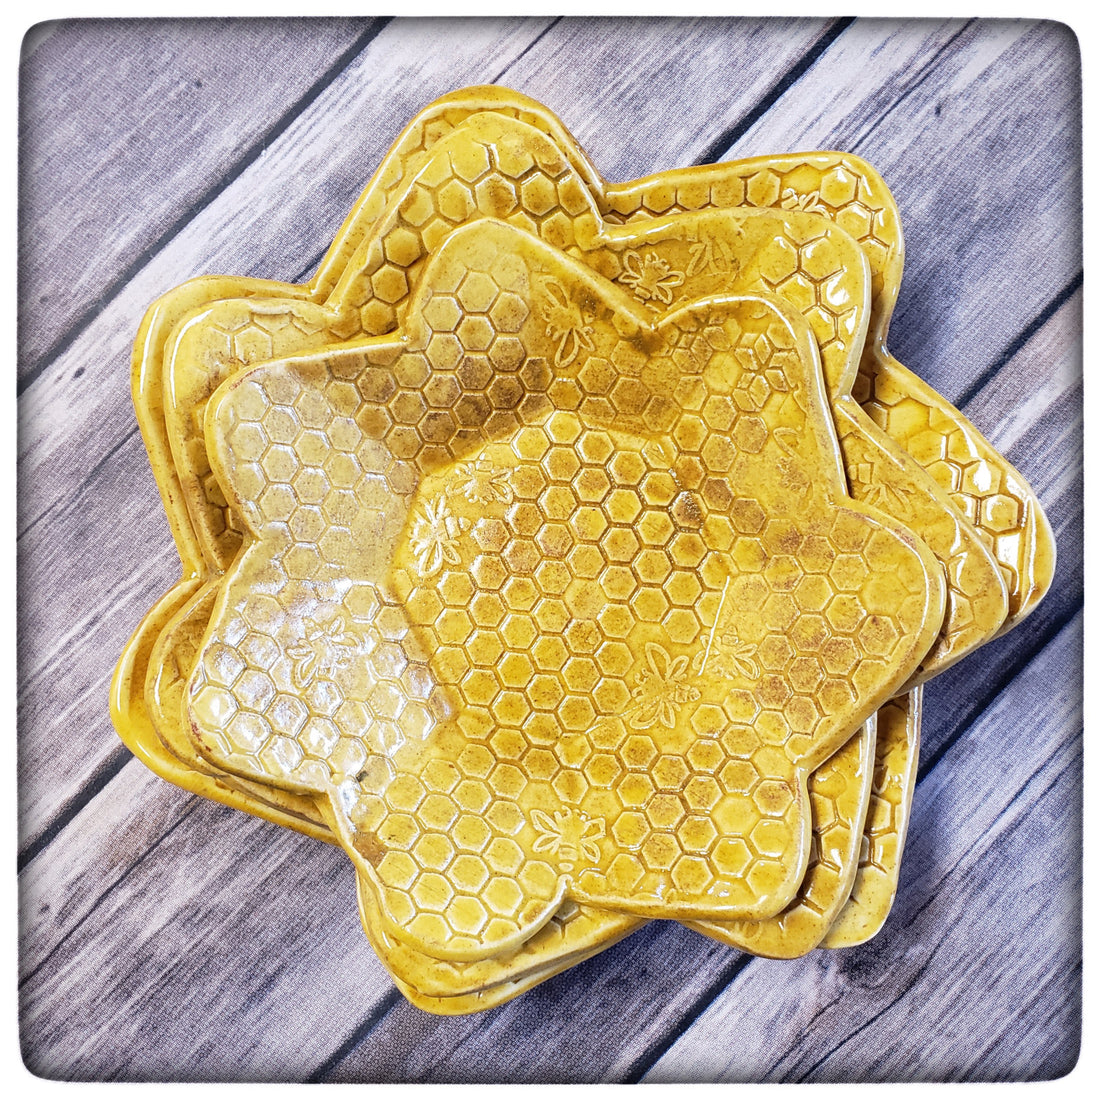 This Week Only: Honeycomb Nesting Dishes